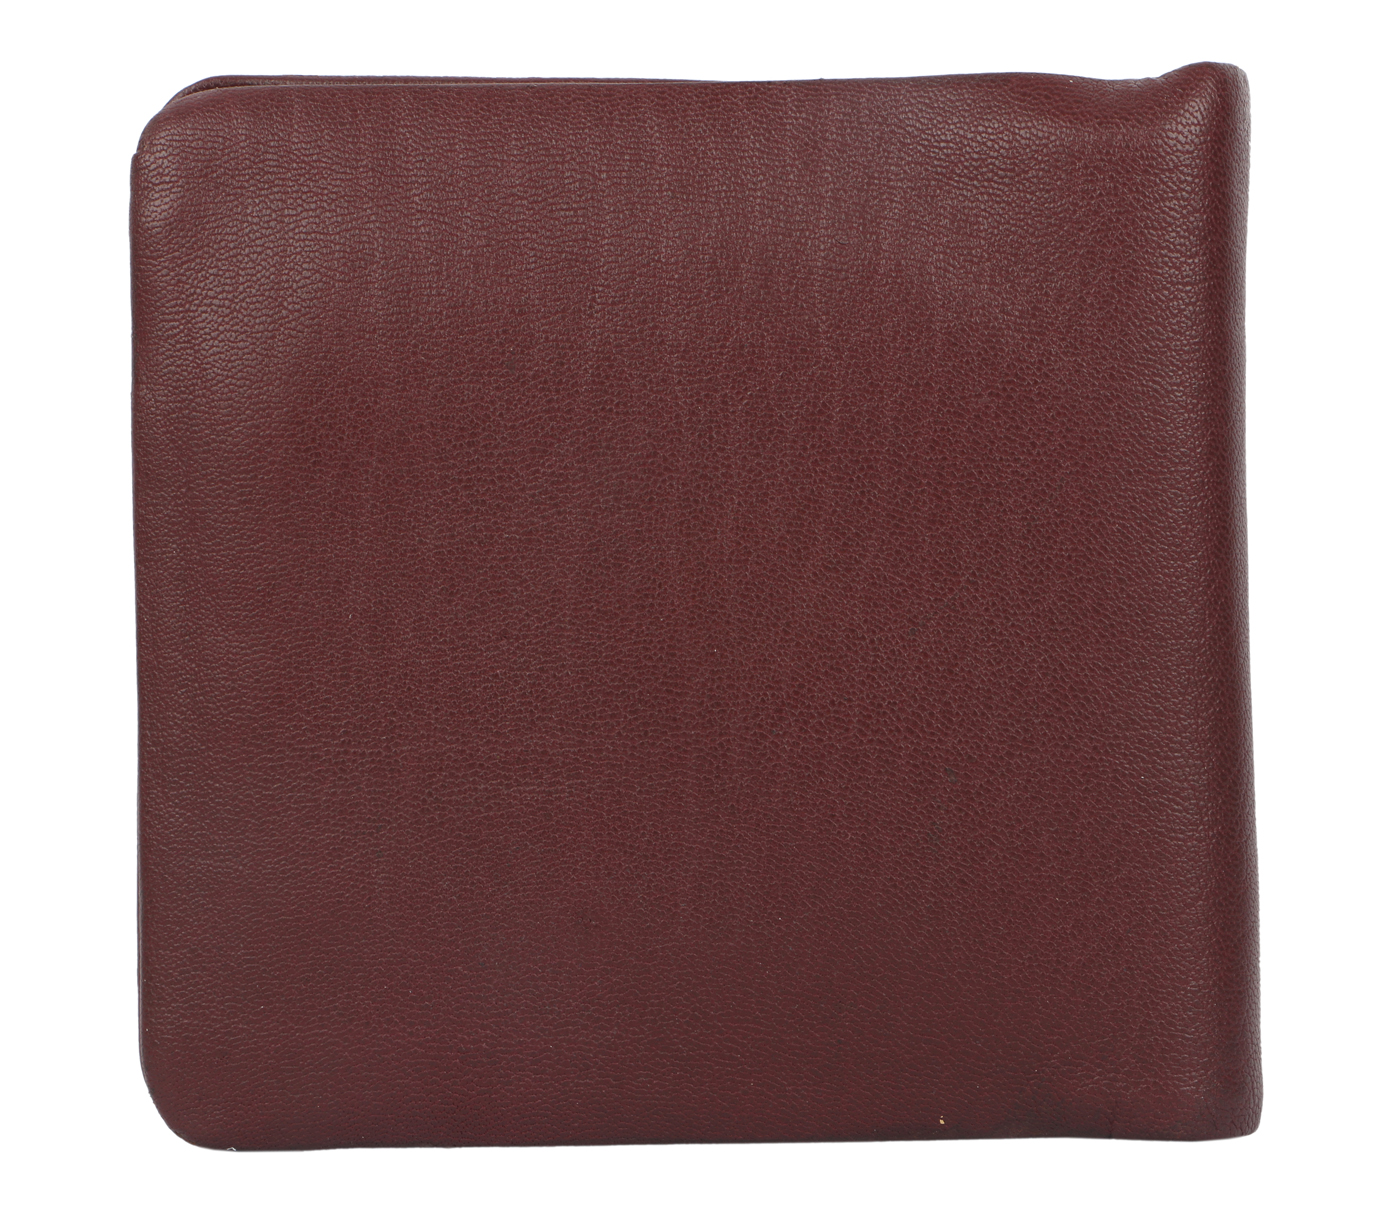 VW1-Ashton-Men's bifold wallet with coin pocket in Genuine Leather - Wine